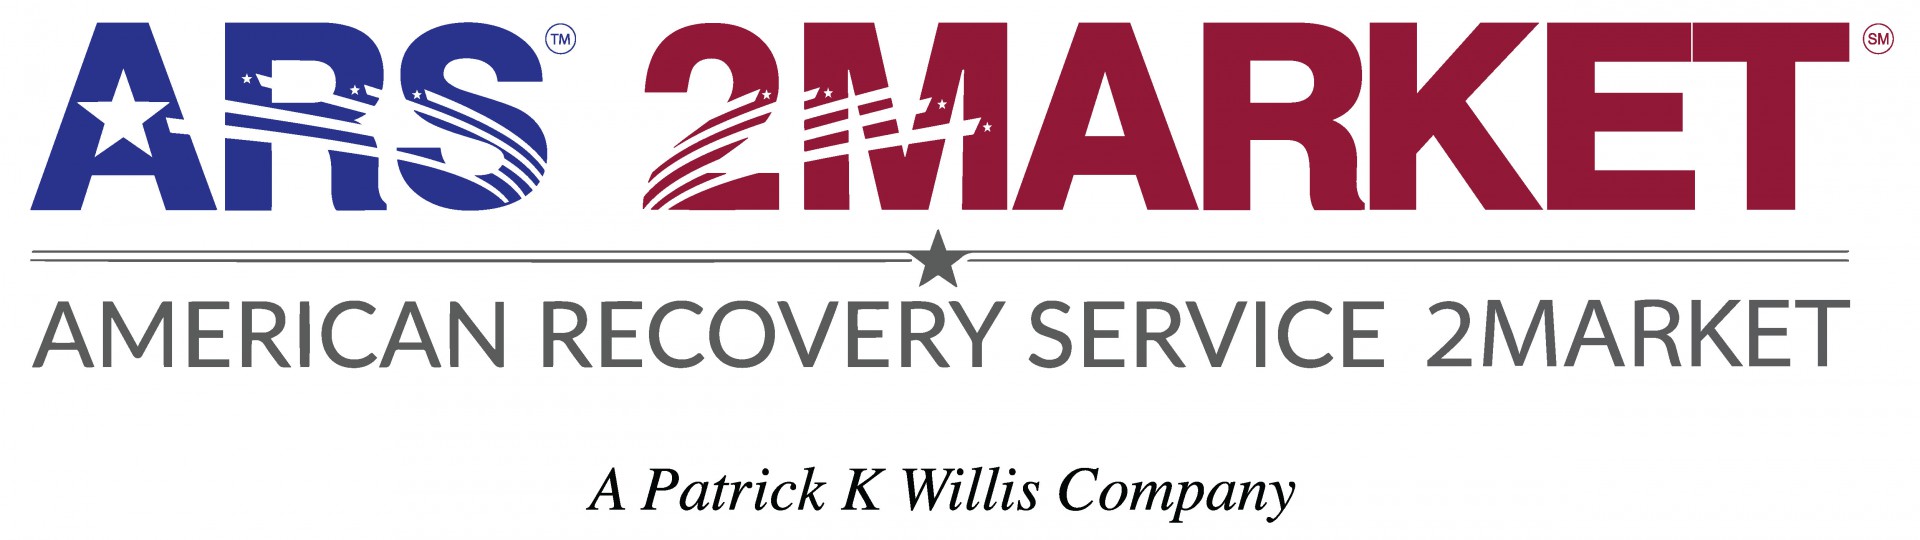 American Recovery Service